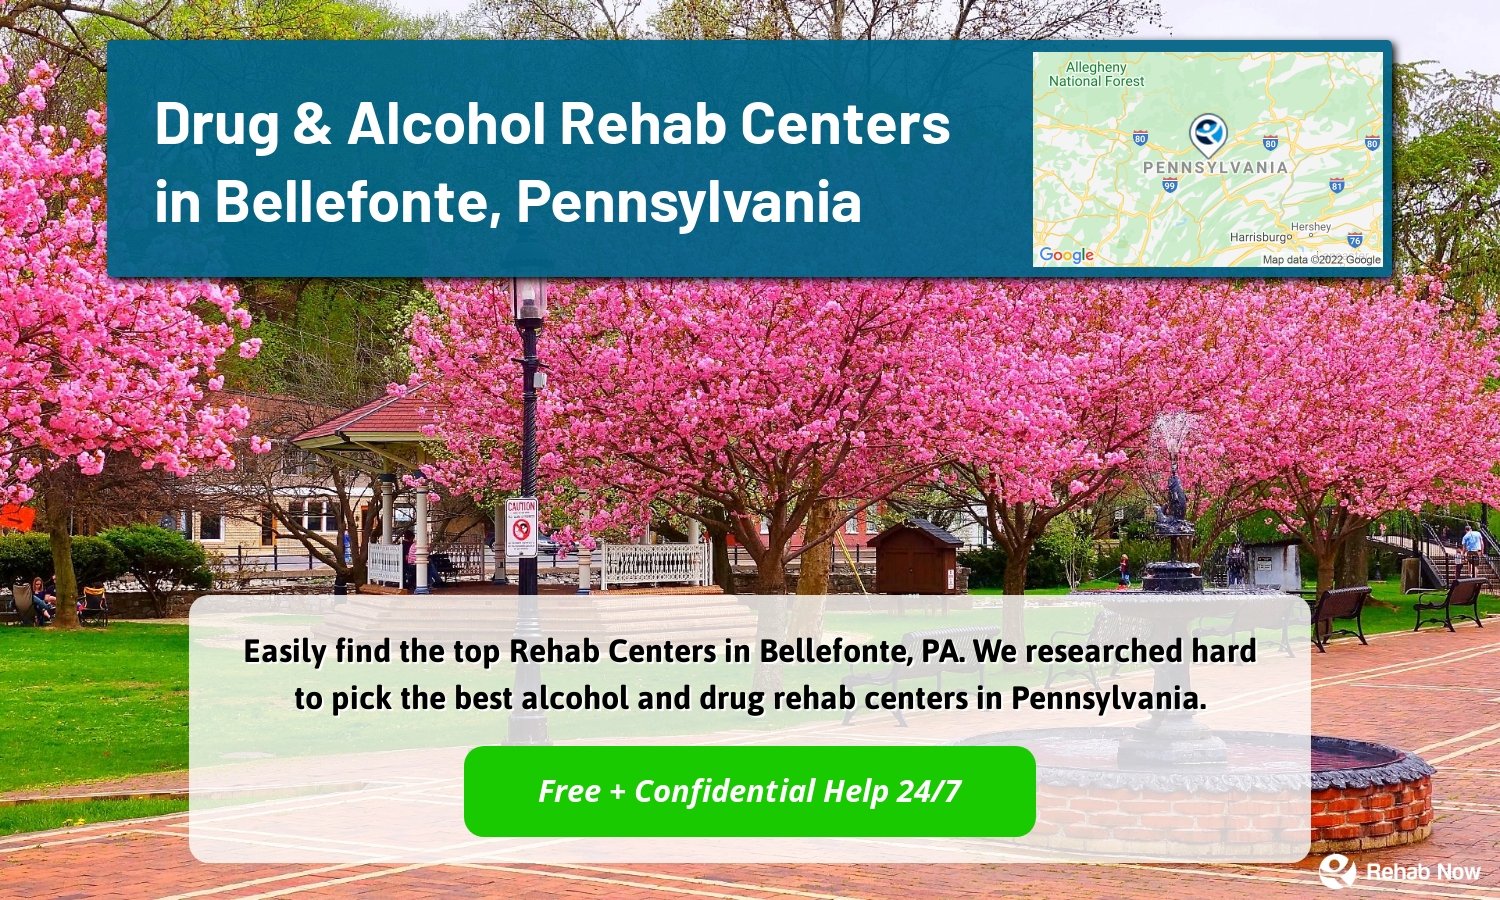 Easily find the top Rehab Centers in Bellefonte, PA. We researched hard to pick the best alcohol and drug rehab centers in Pennsylvania.